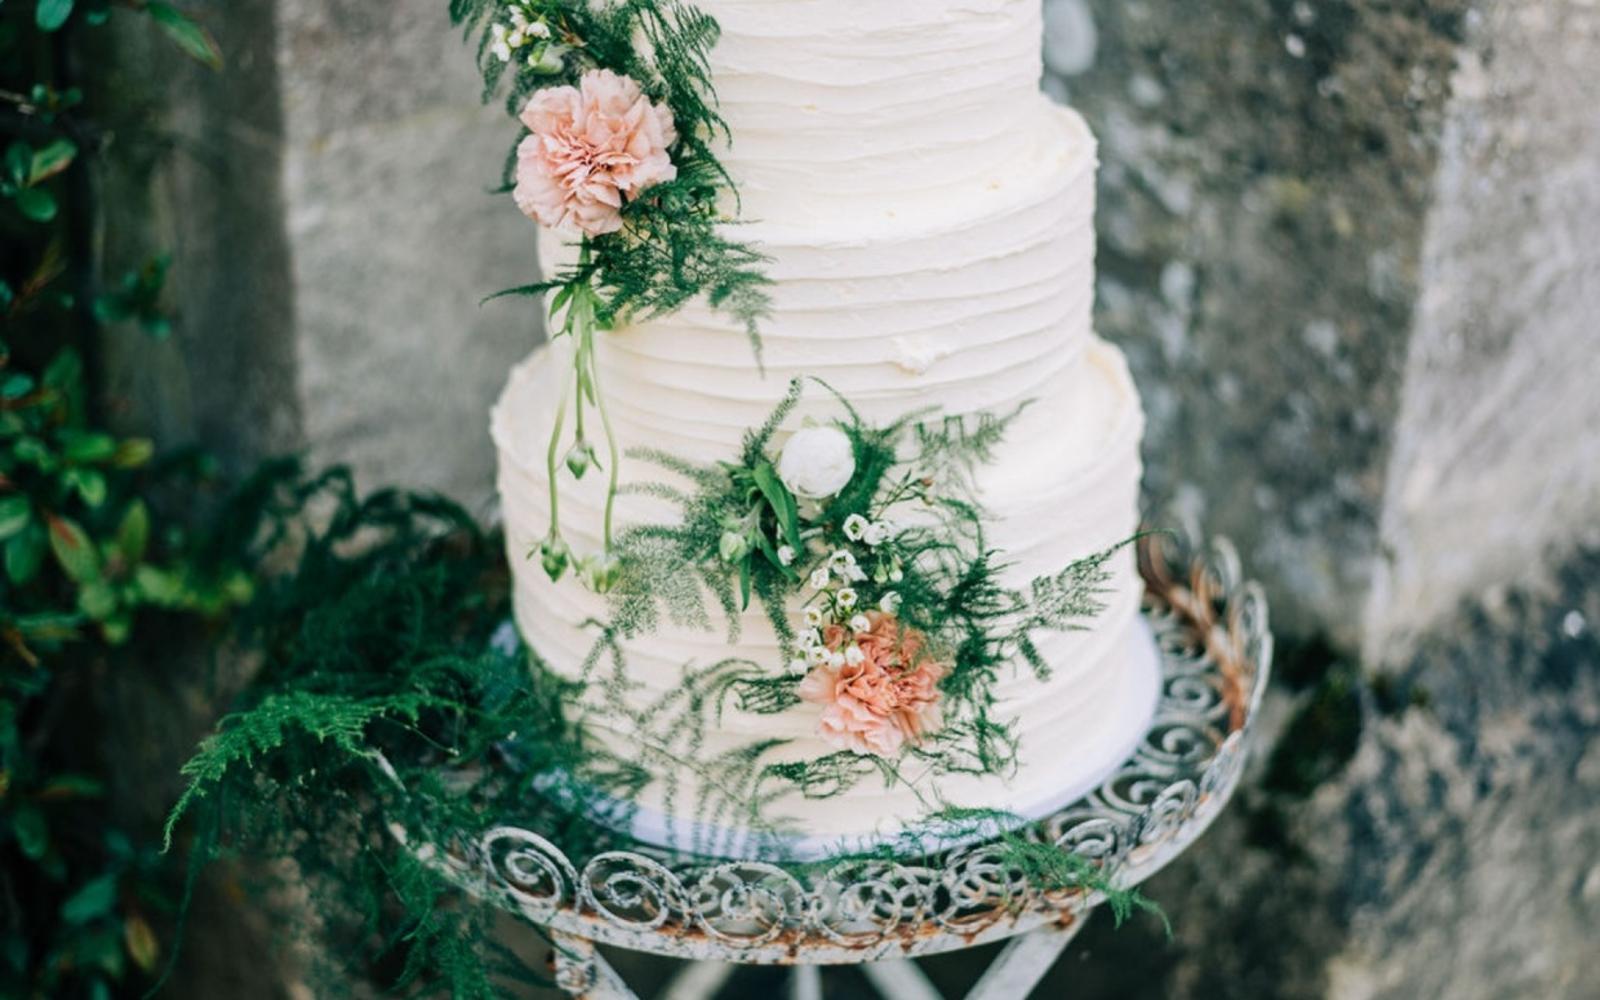 Corky and Prince Kimmi's Cakes Polly Morton Makeup Artist Dymond's Shoes and Accessories The Middle Green My eden Rachel Jane Photography styled shoot at The Royal Agricultural University wedding venue Cirencester eco-friendly artisan sustainable buttercream fresh flowers cake